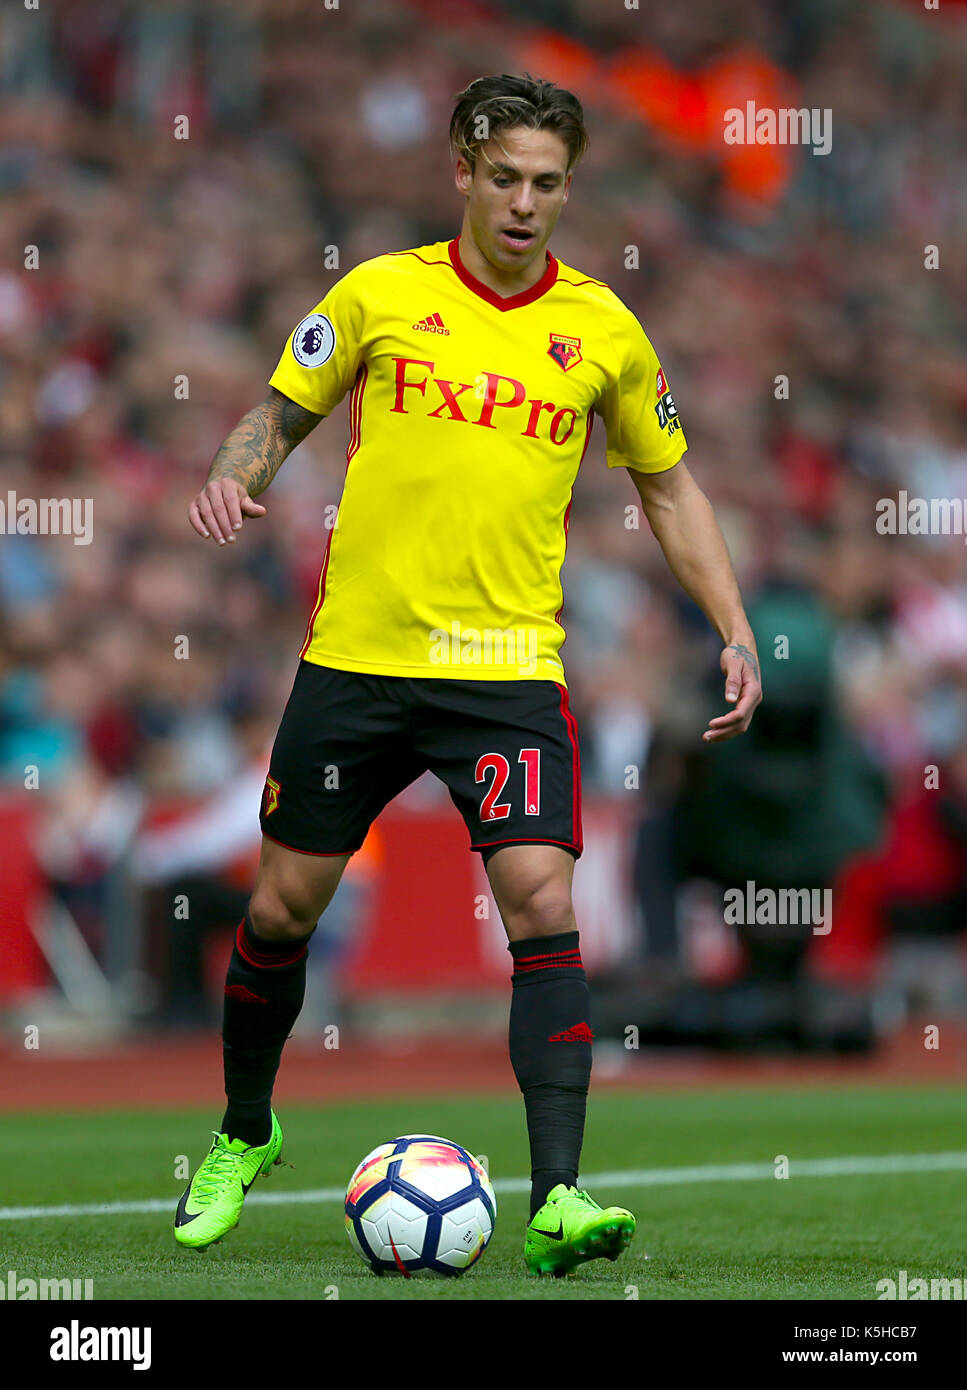 Watford's Kiko Femenia during the Premier League match at St Mary's Stadium, Southampton. PRESS ASSOCIATION Photo. Picture date: Saturday September 9, 2017. See PA story SOCCER Southampton. Photo credit should read: Steven Paston/PA Wire. RESTRICTIONS: No use with unauthorised audio, video, data, fixture lists, club/league logos or 'live' services. Online in-match use limited to 75 images, no video emulation. No use in betting, games or single club/league/player publications. Stock Photo